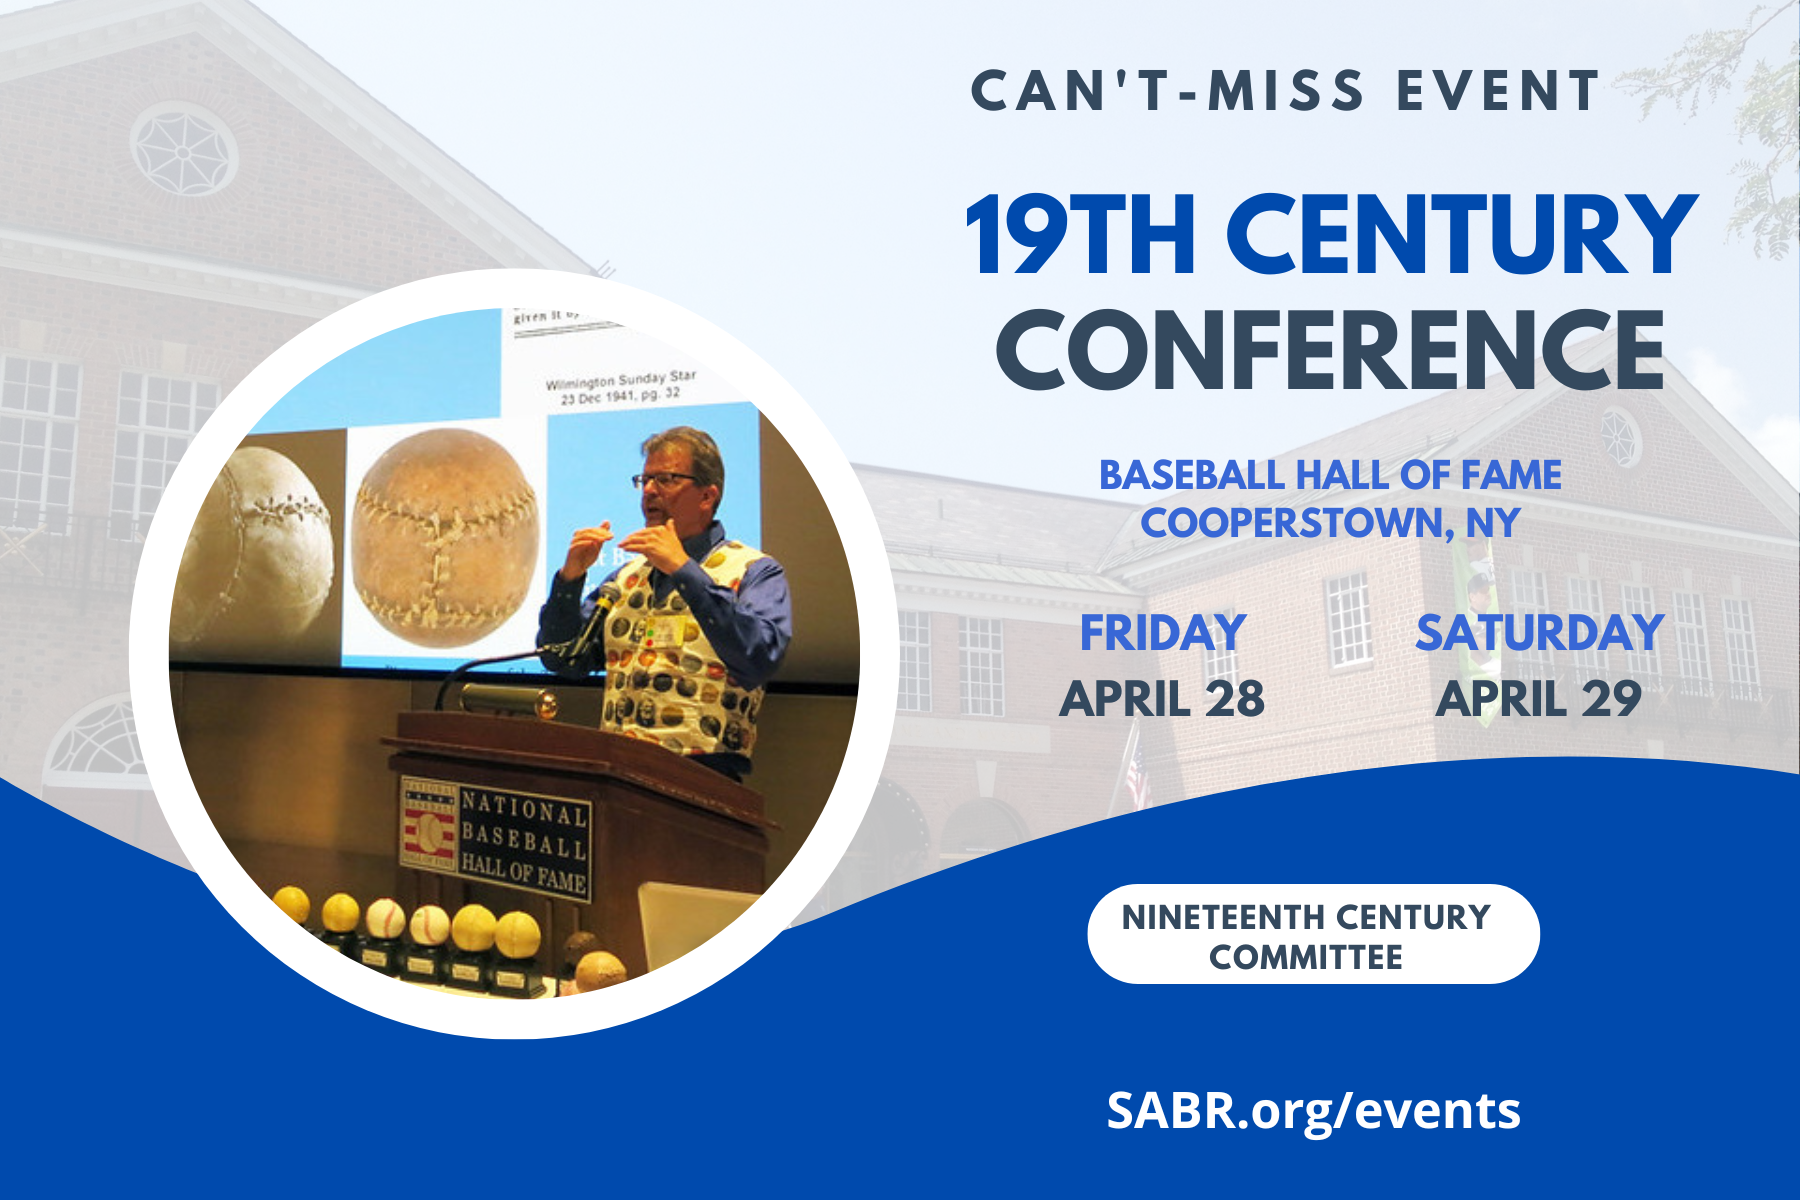 The 14th annual SABR Frederick Ivor-Campbell 19th Century Base Ball Conference will be held on April 28-29, 2023, at the Baseball Hall of Fame in Cooperstown, New York. To learn more, visit https://sabr.org/ivor-campbell19c